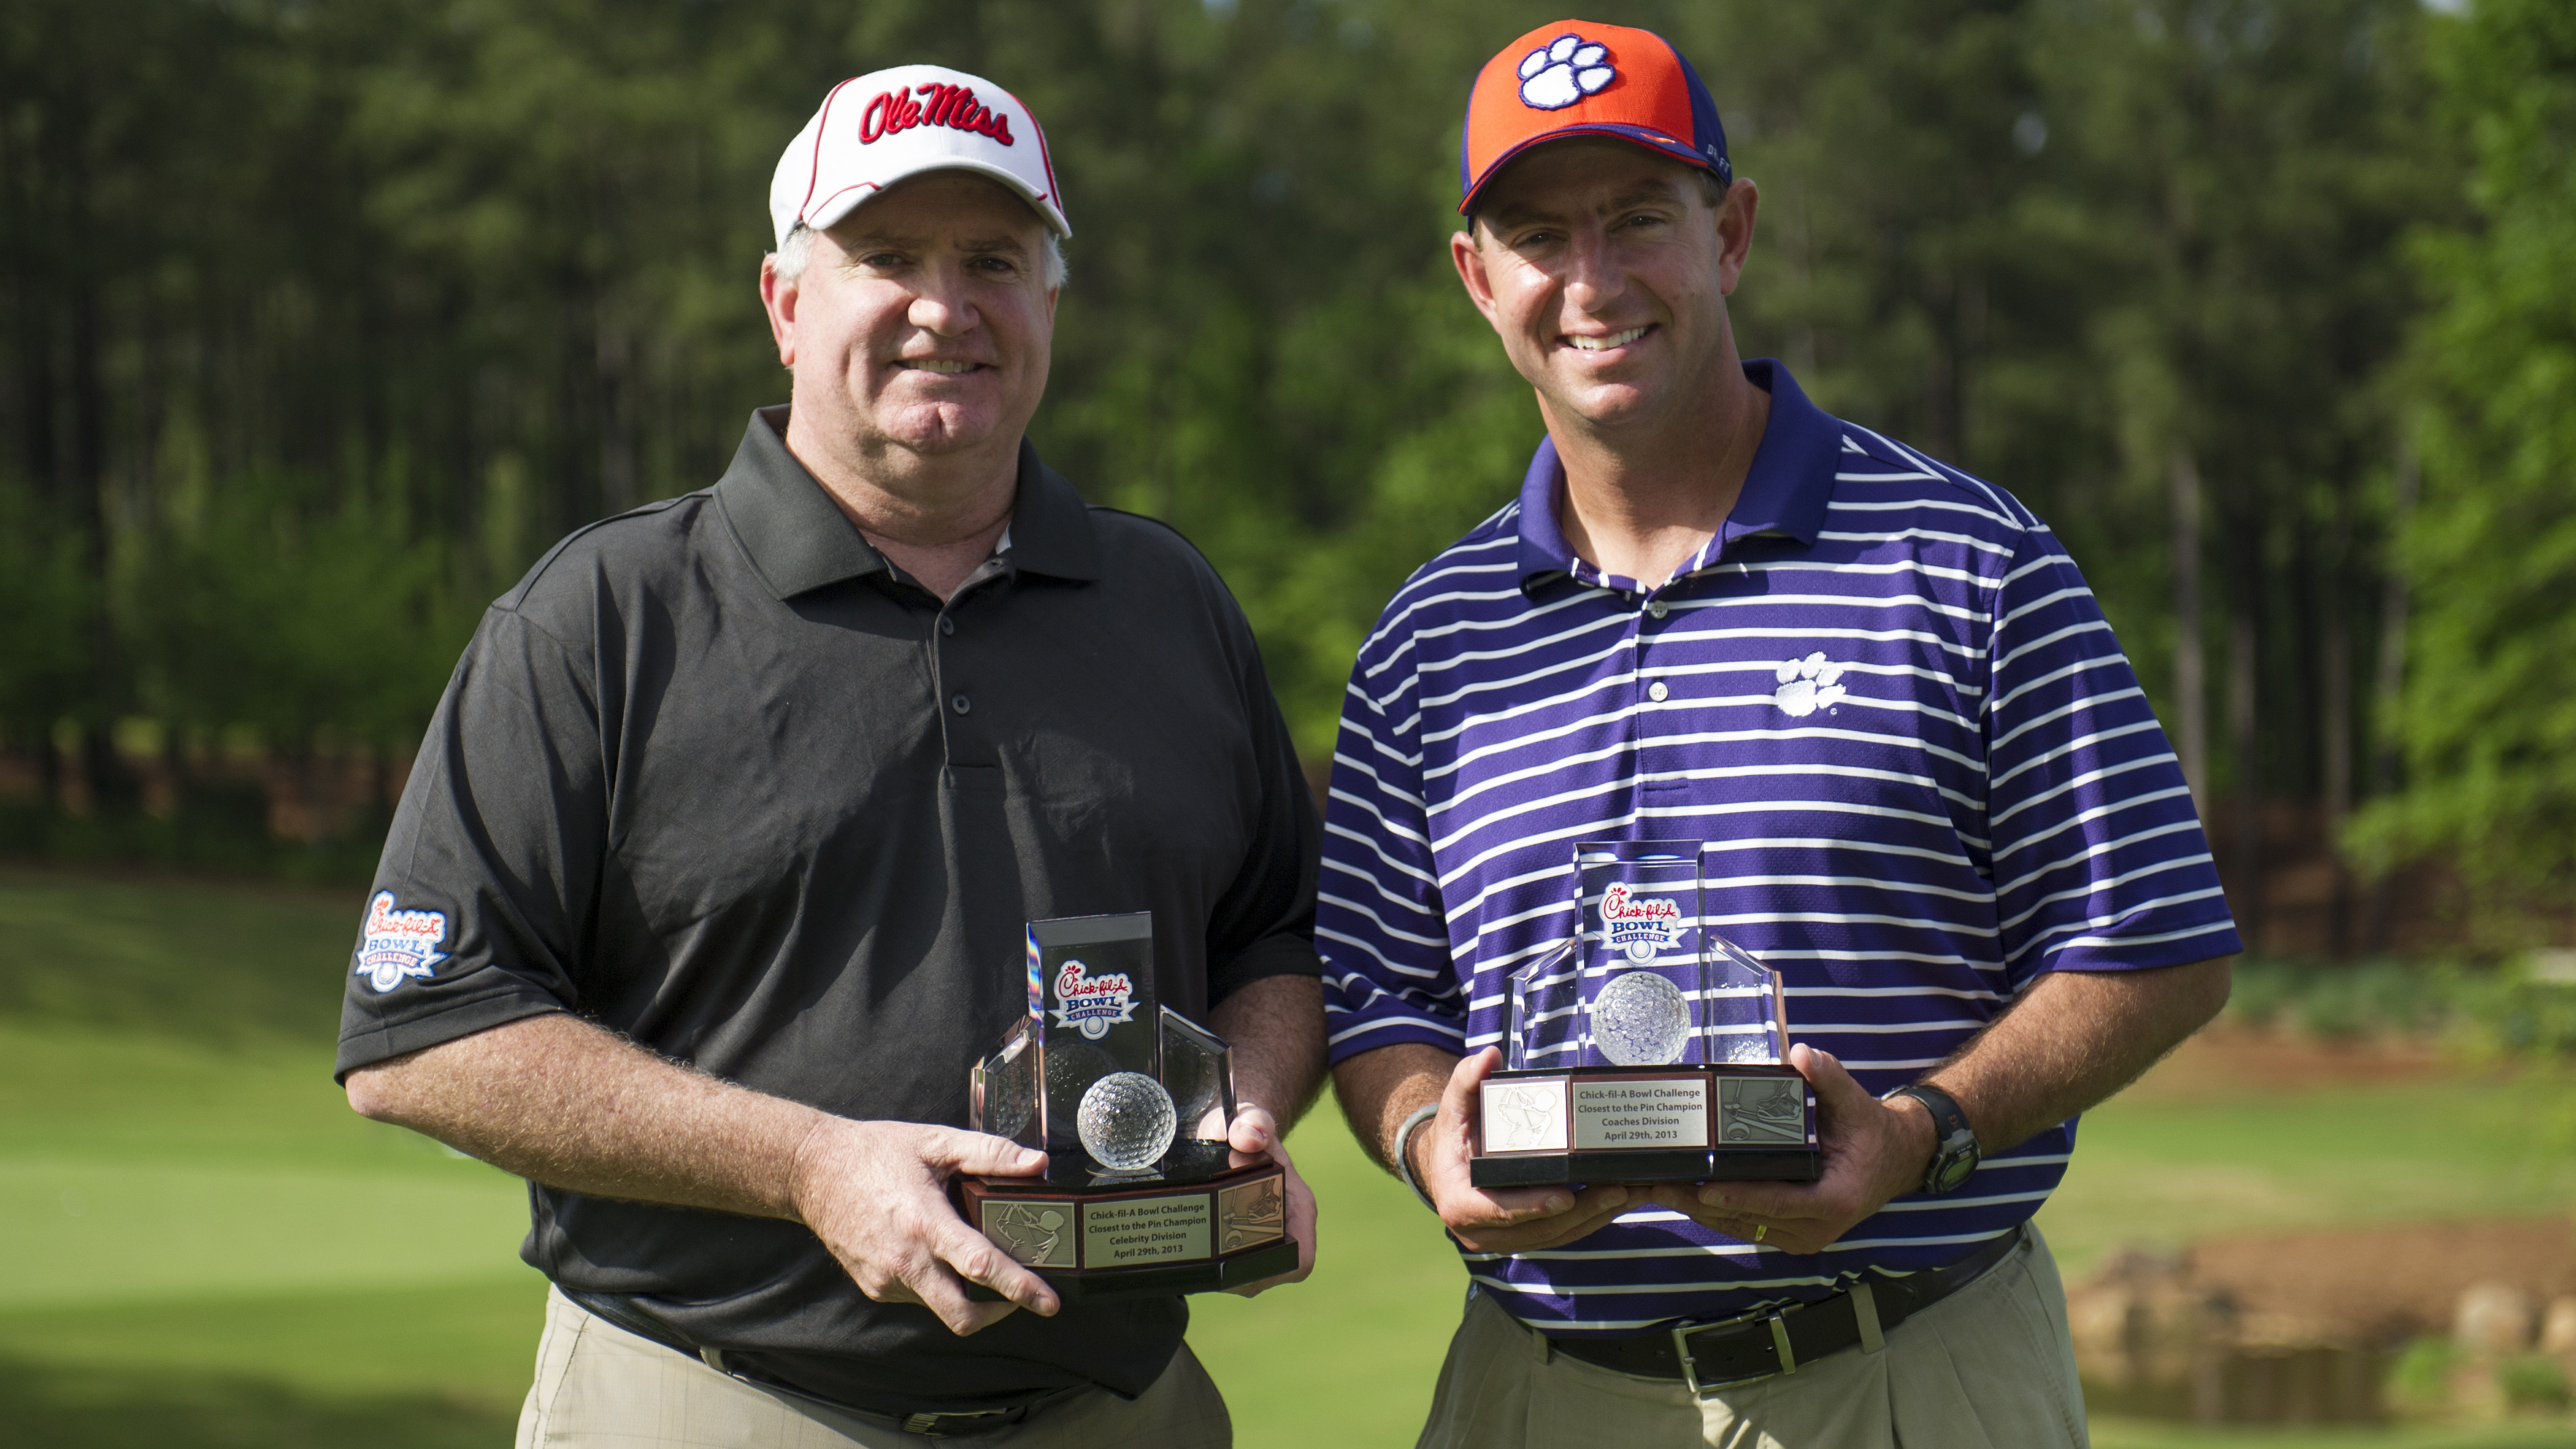 Swinney Wins Closest to the Pin Contest at 2013 Chick-fil-A Bowl Challenge